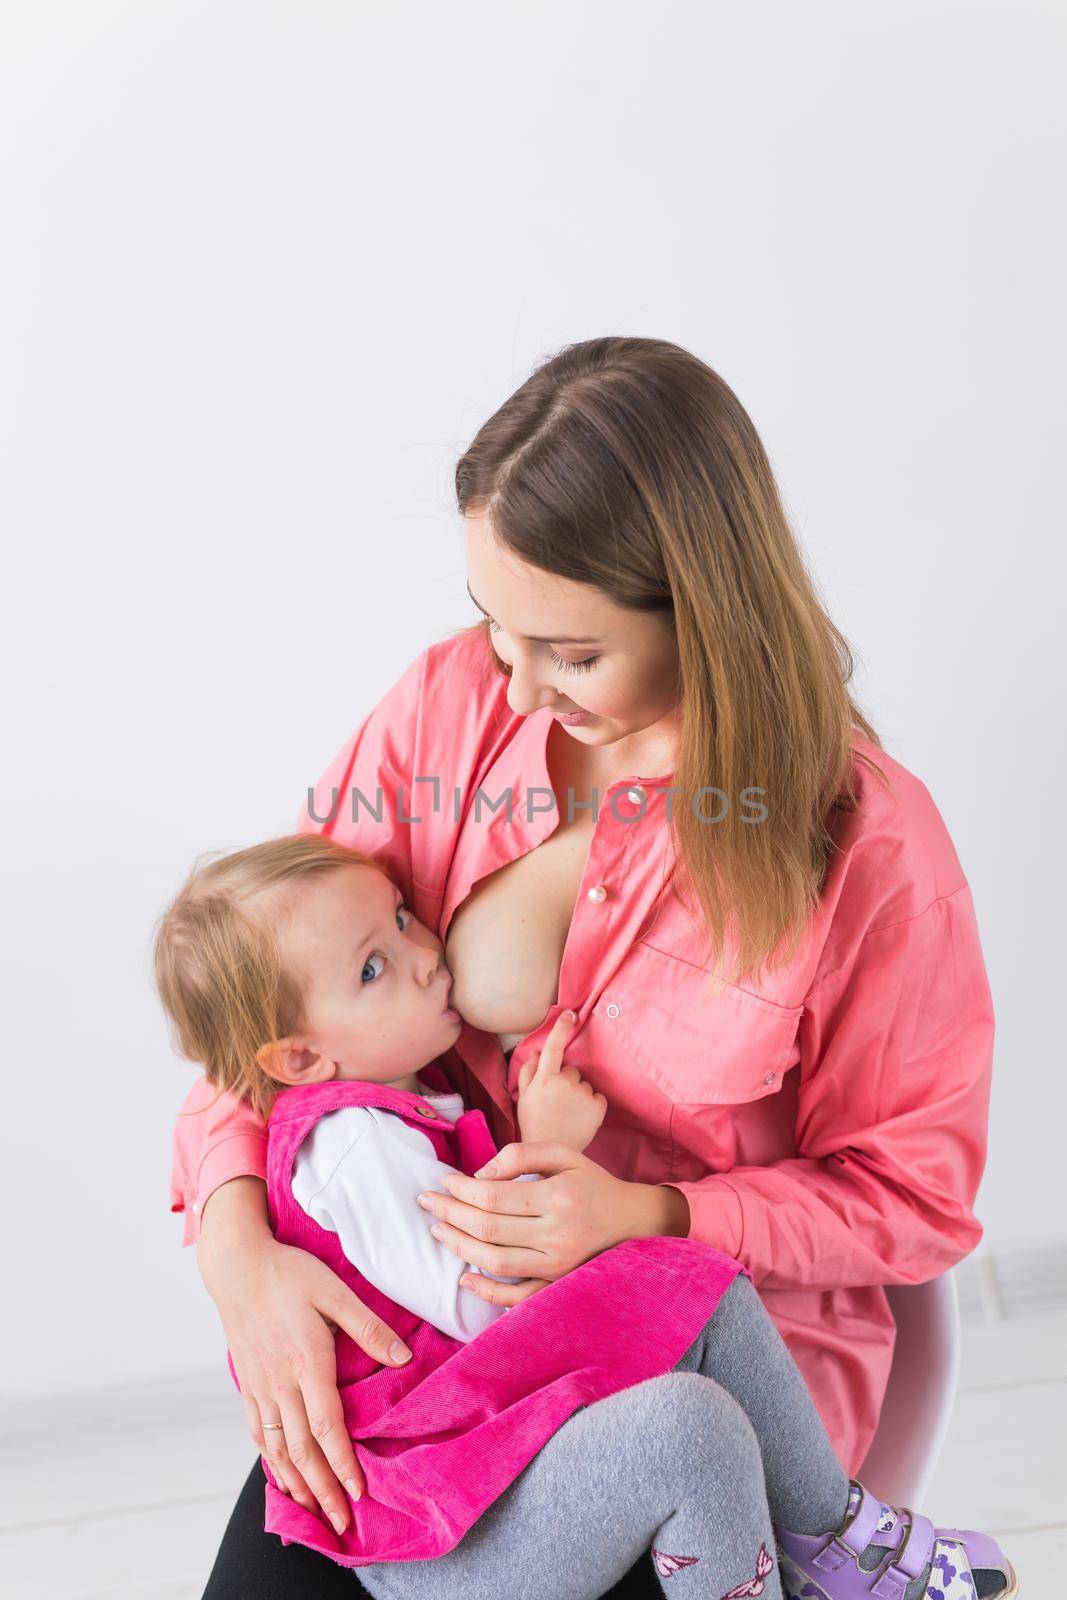 Young beautiful mother, breastfeeding her baby girl. Mom breastfeeding infant.